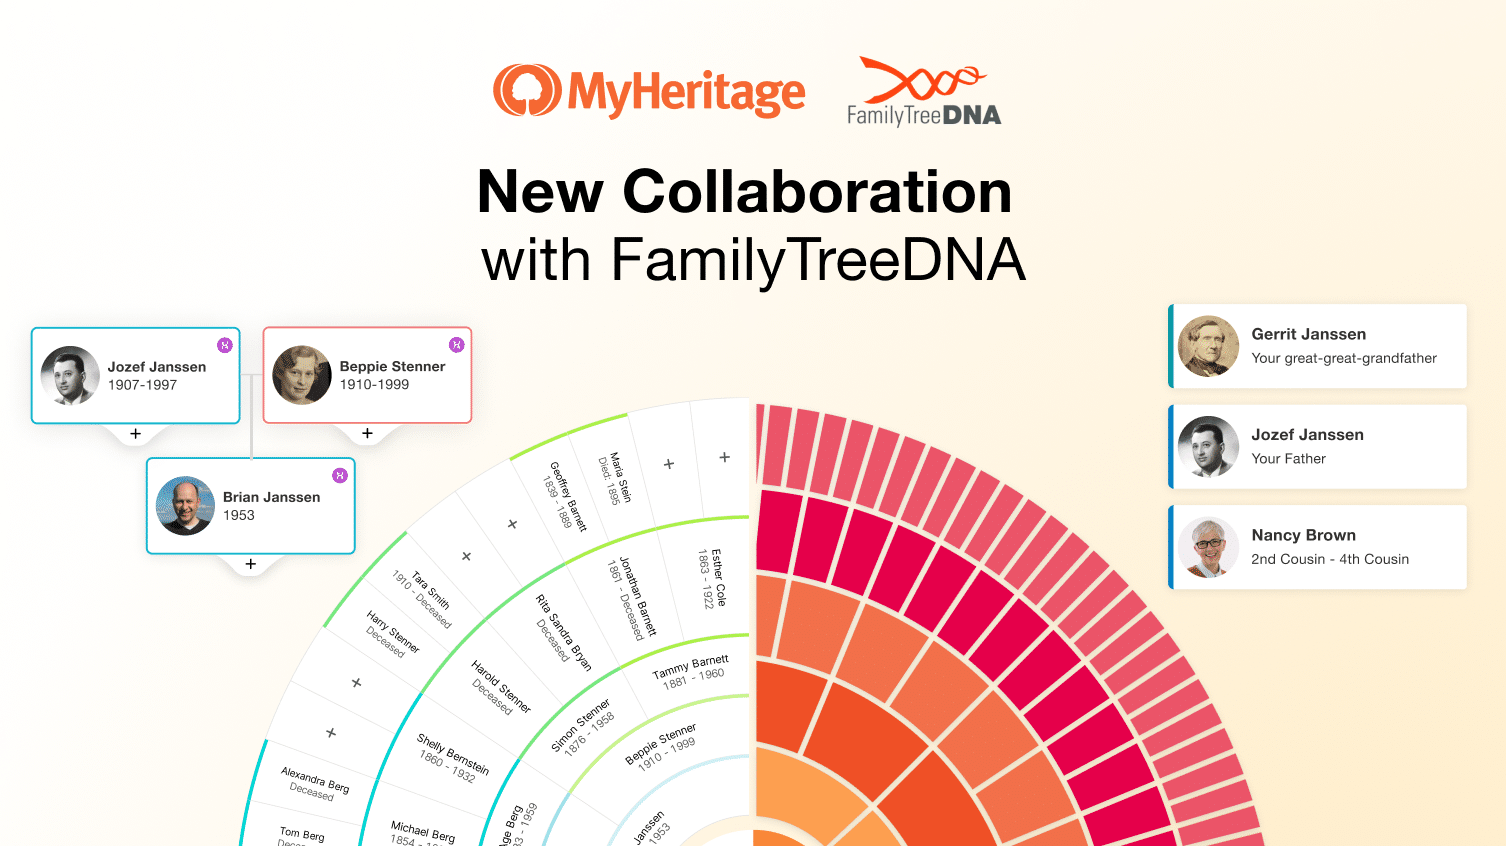 New Collaboration with FamilyTreeDNA